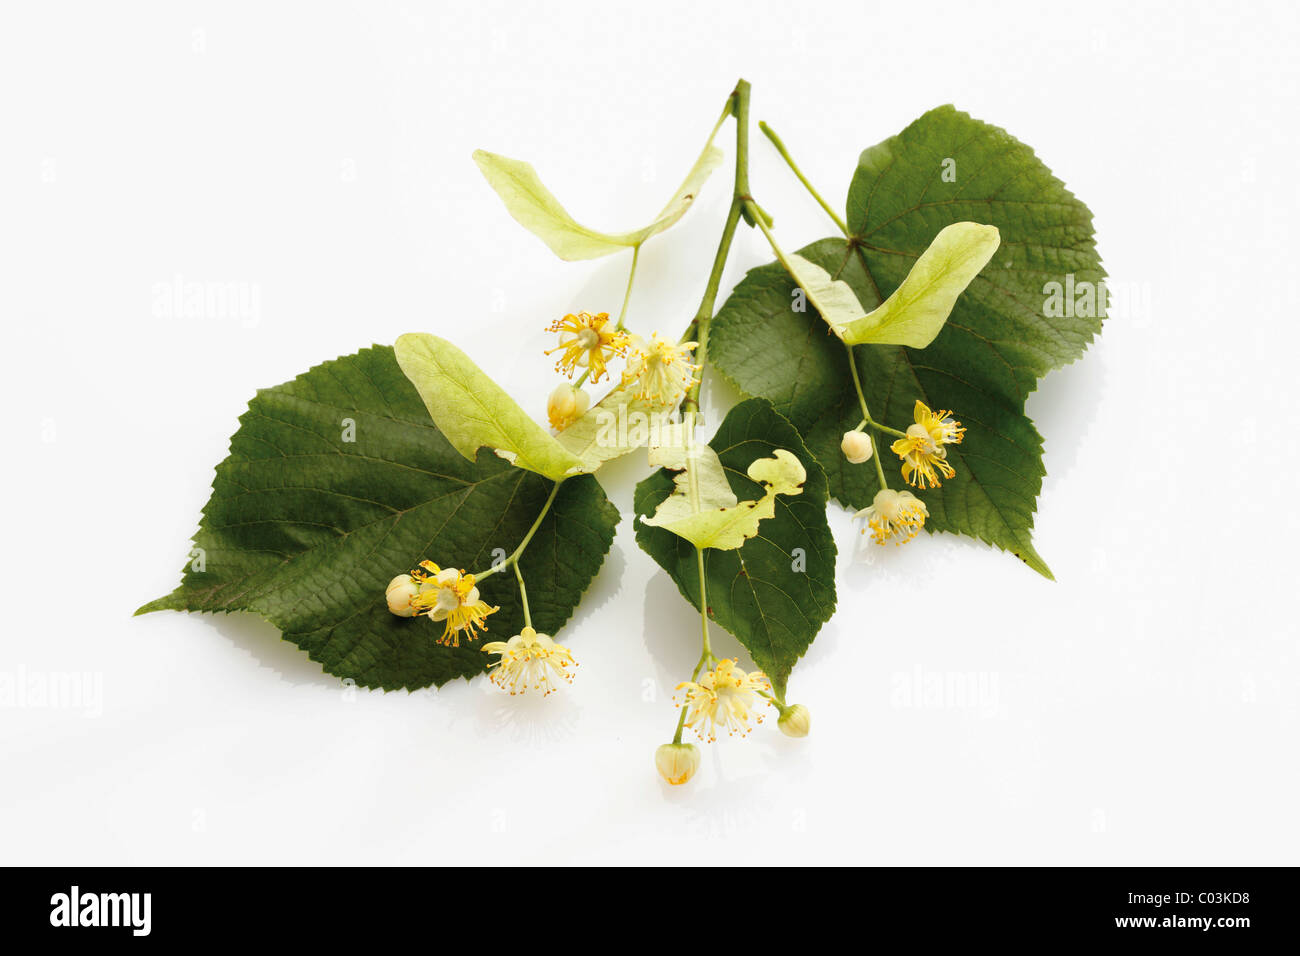 Lime or Linden (Tilia) leaves and flowers Stock Photo